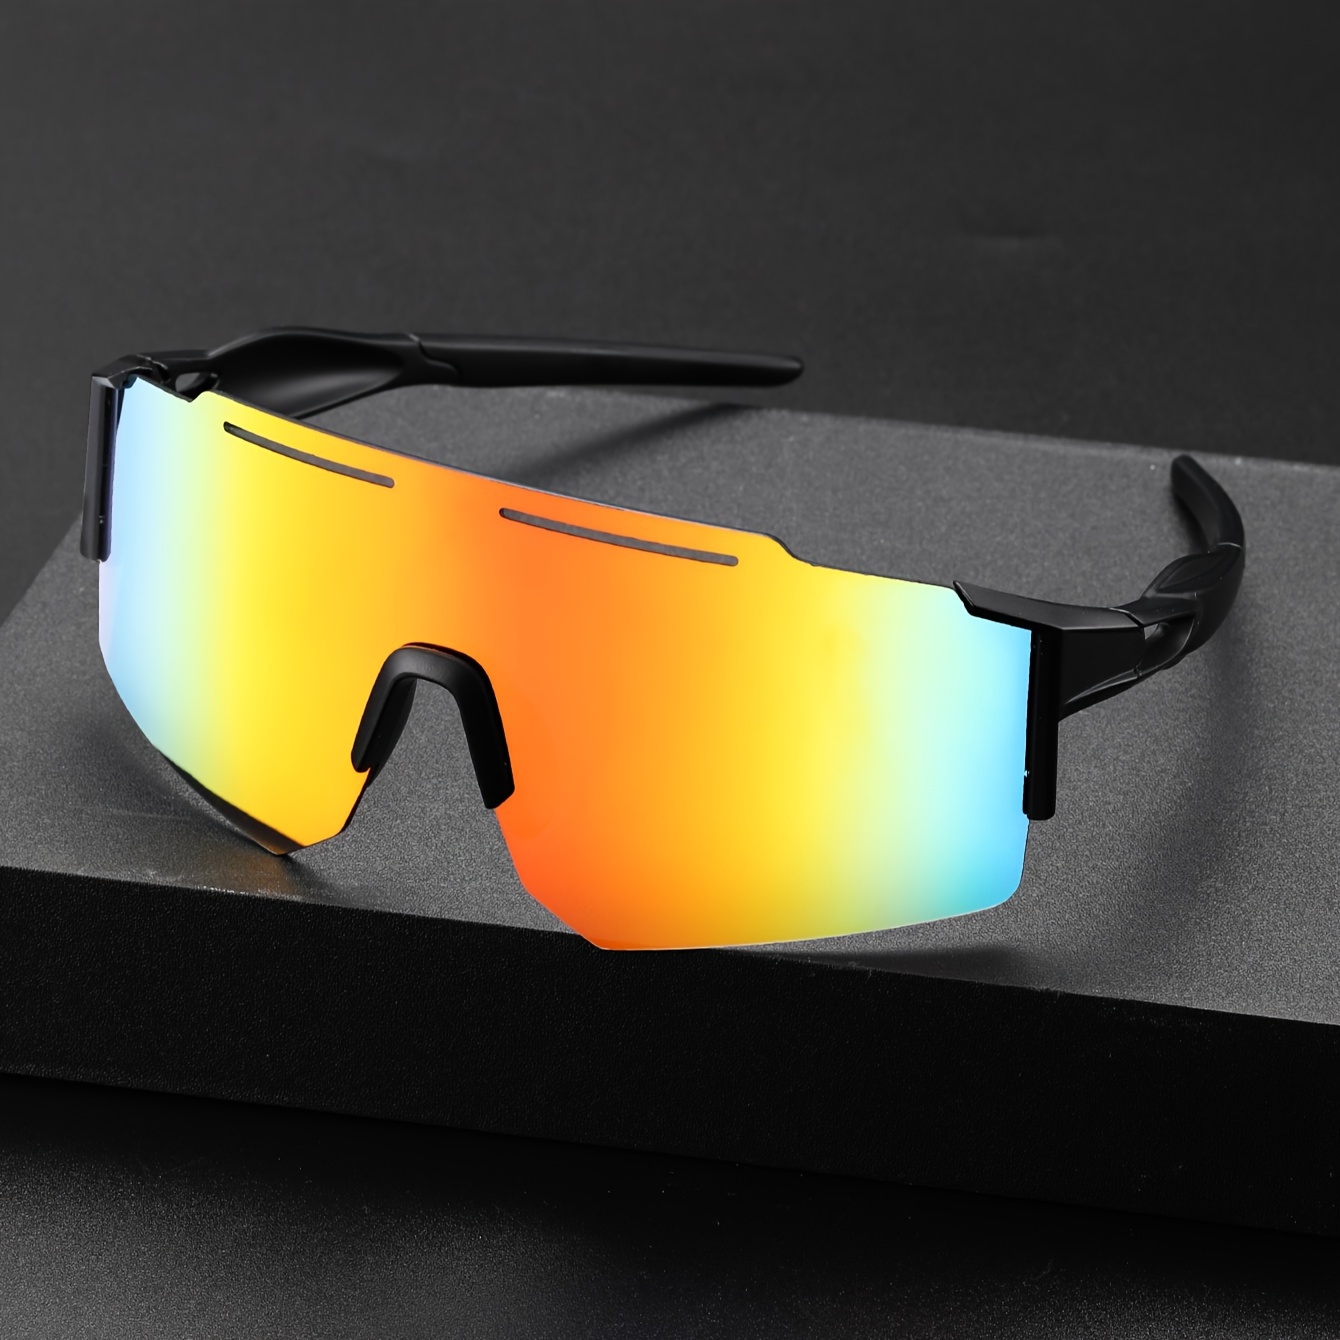 

Premium Cyberpunk Fantasy Rimless One-piece Fashion Glasses, Wrap Around, For Men Women Outdoor Sports Party Vacation Travel Driving Fishing Cycling Supply Photo Prop